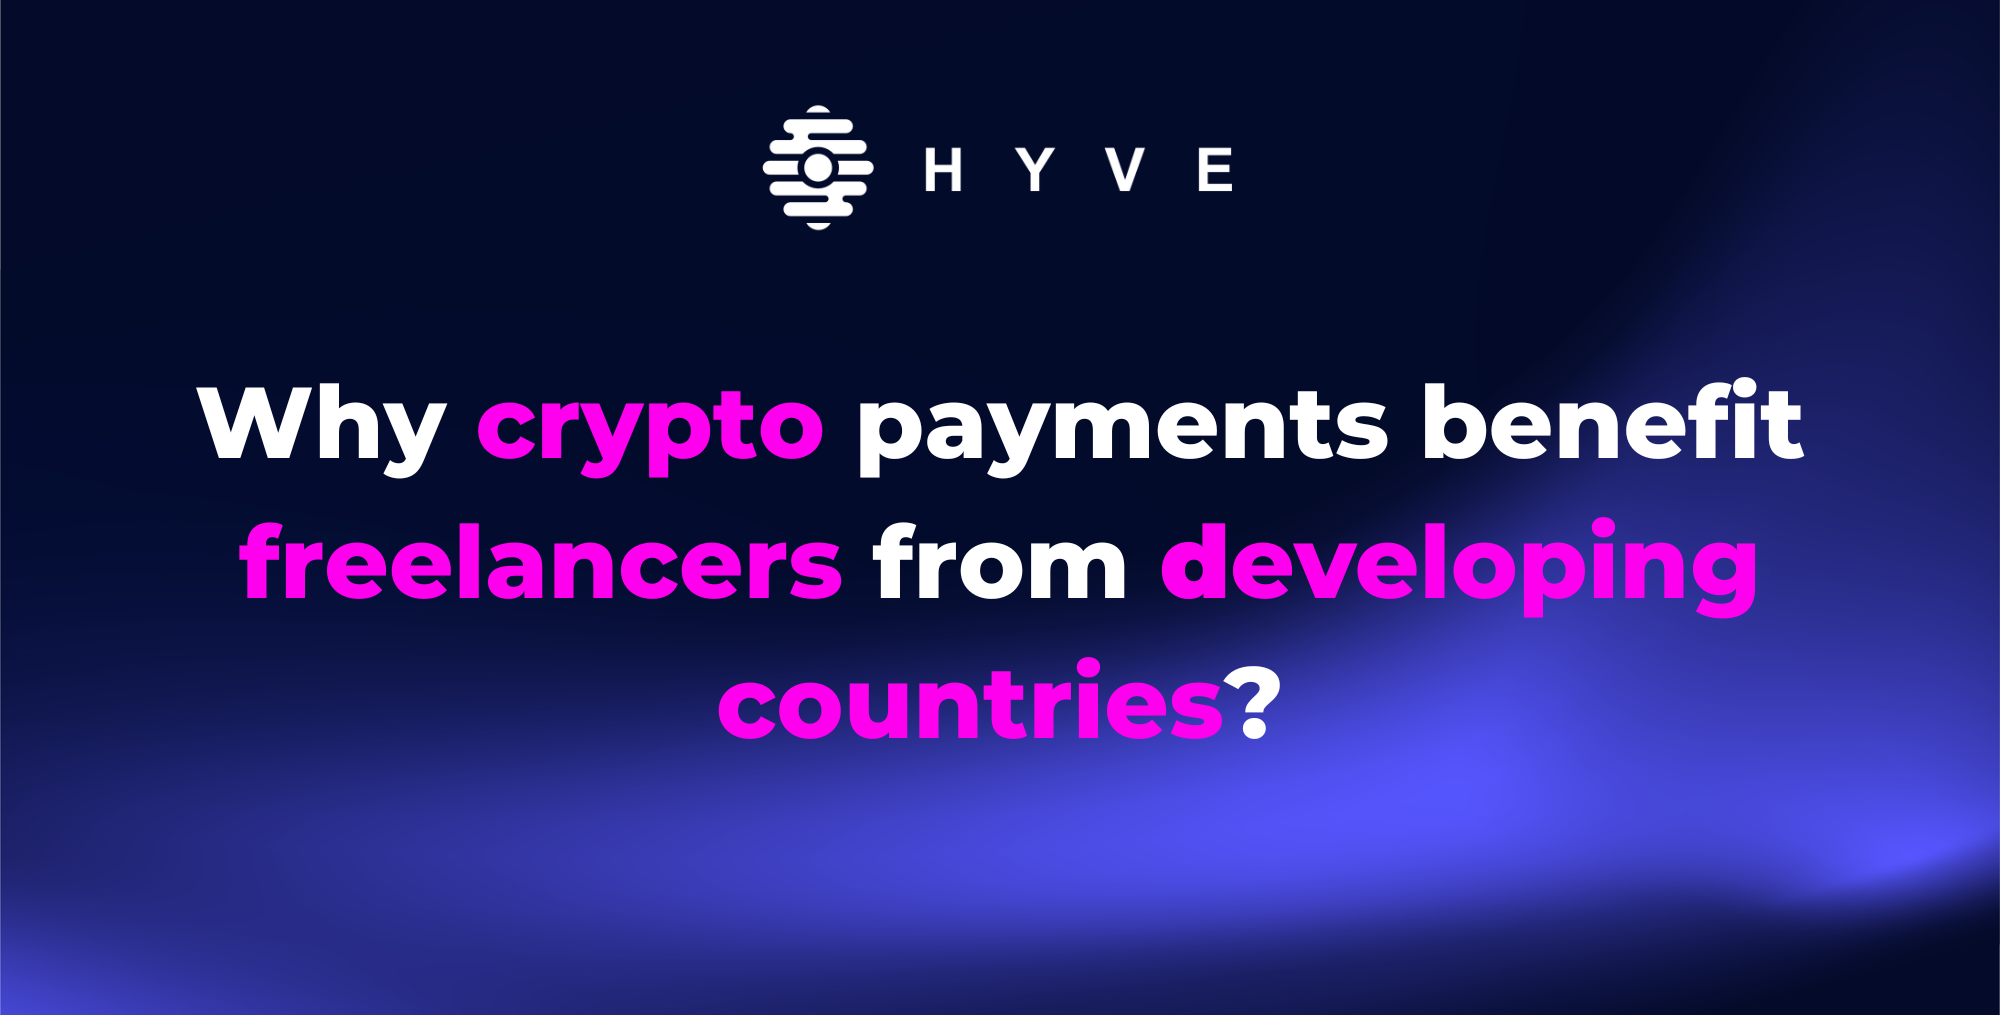 Why crypto payments benefit freelancers from developing countries?